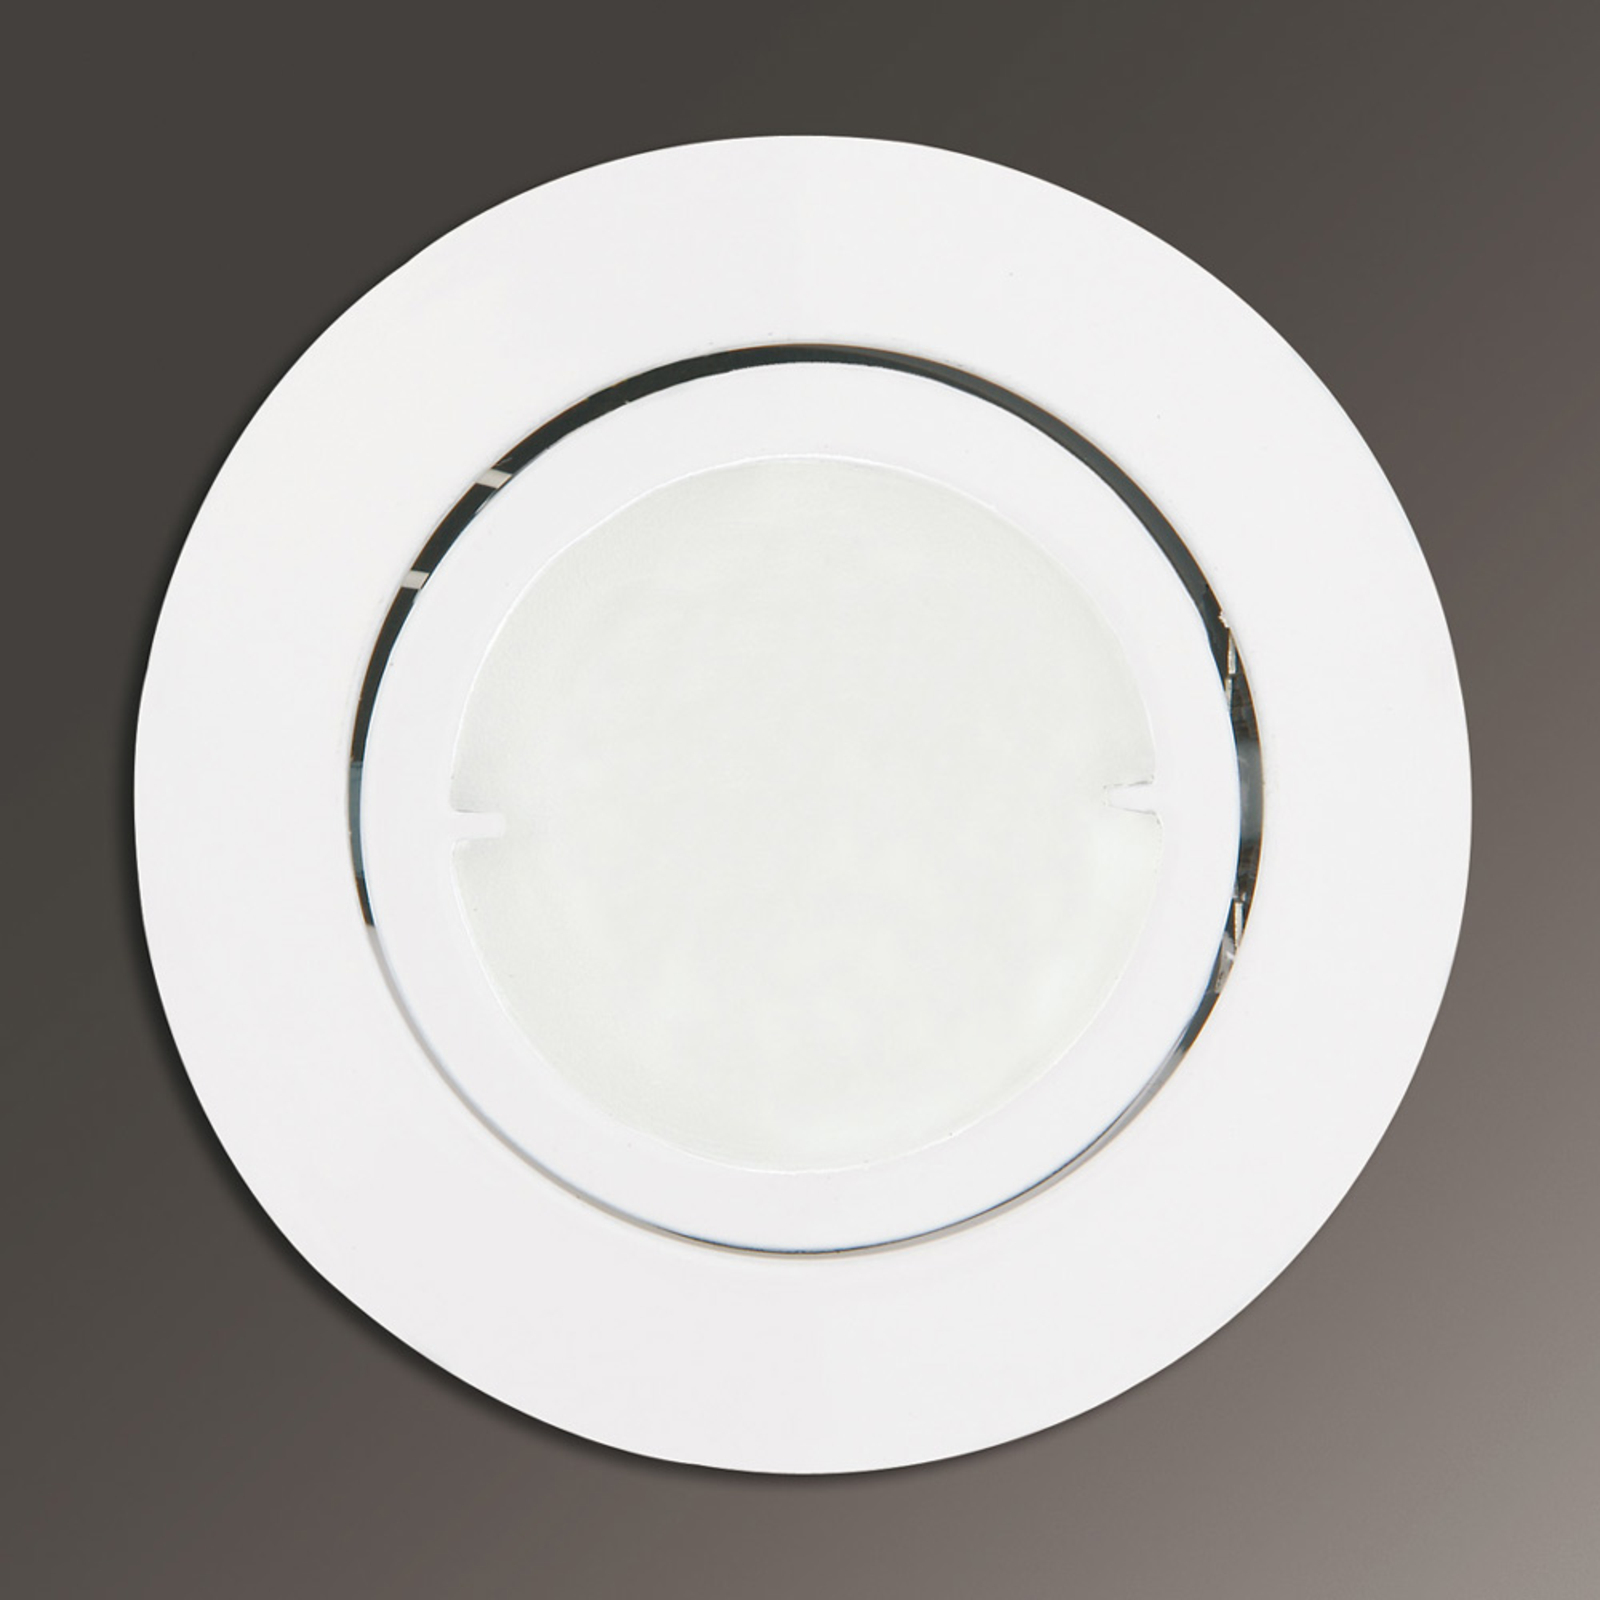 Joanie LED recessed light in white, round